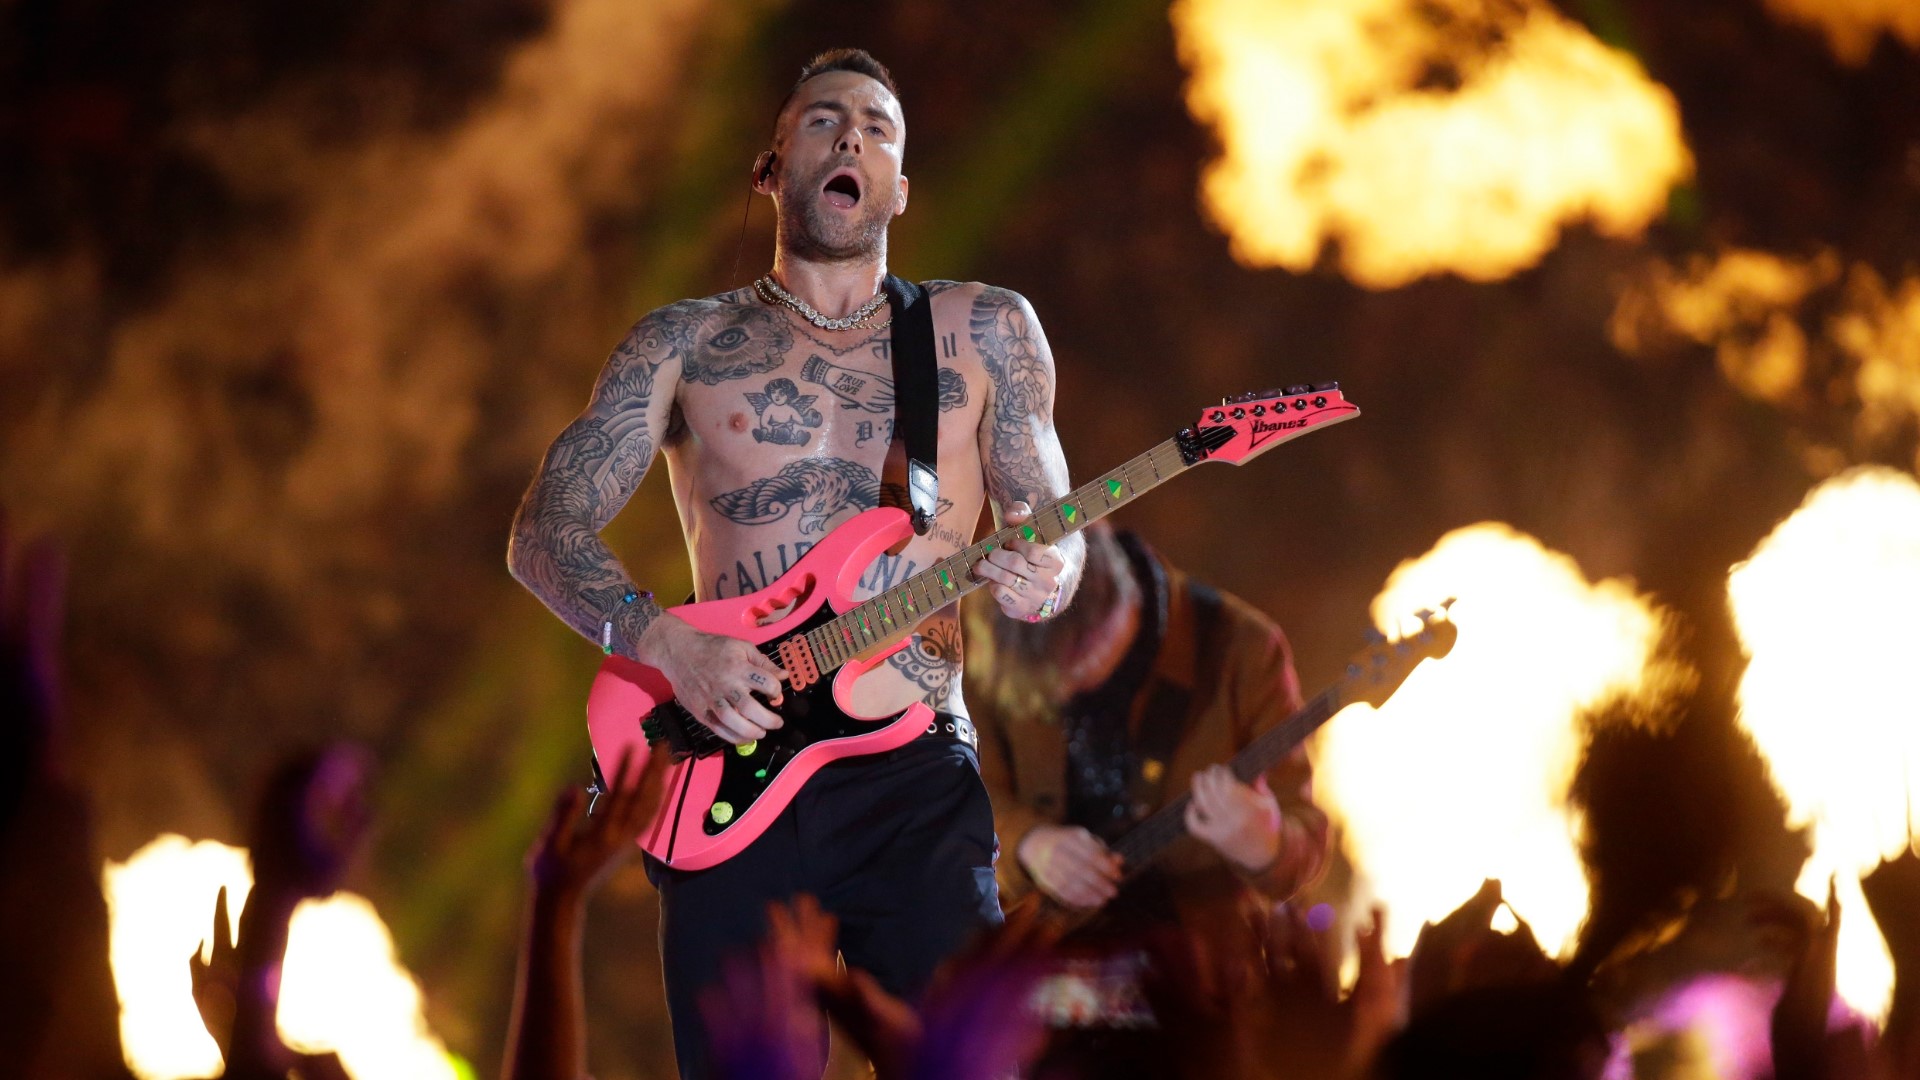 In the day after Super Bowl LIII, social media continues to talk about Maroon 5's halftime show, Gladys Knight's rendition of the National Anthem, and Tom Brady's daughter Vivian.